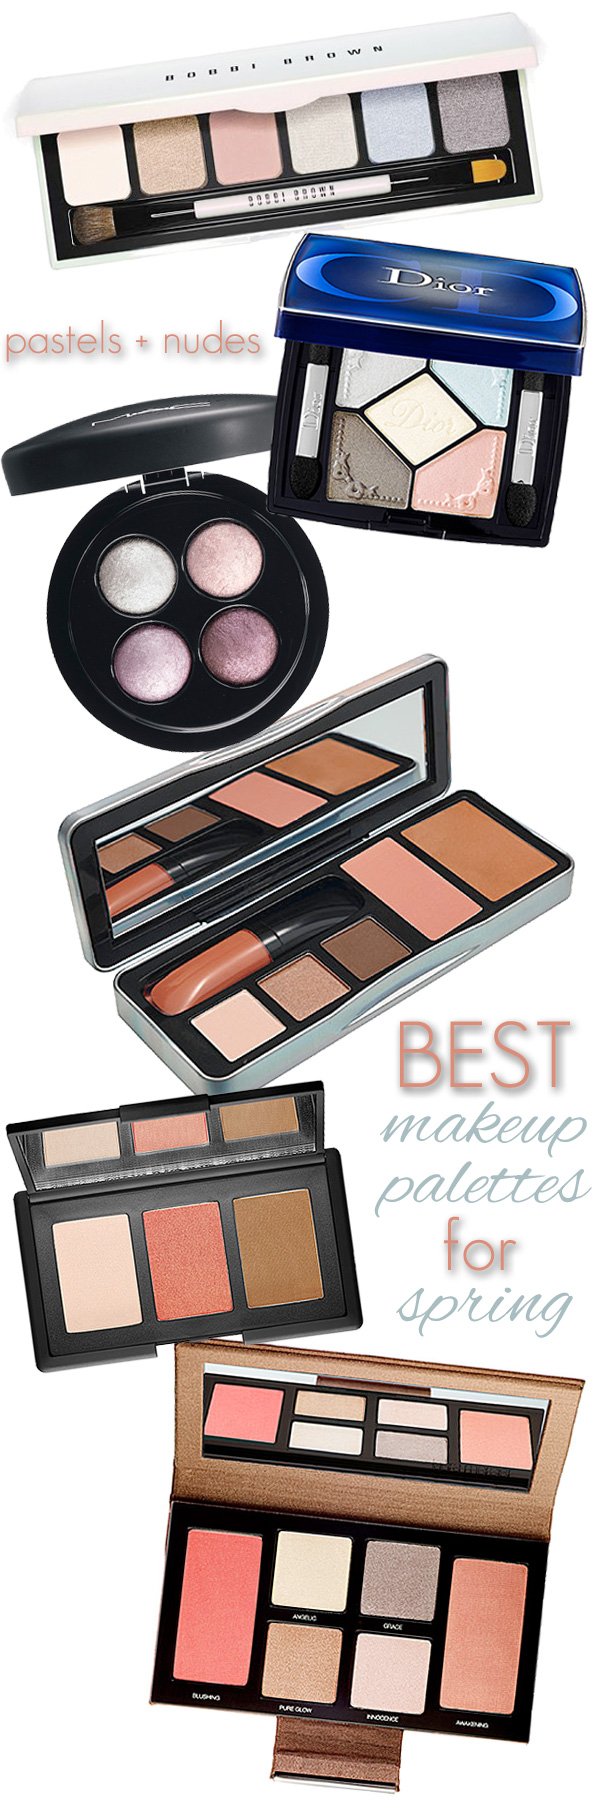 The Best Makeup Palettes for Spring